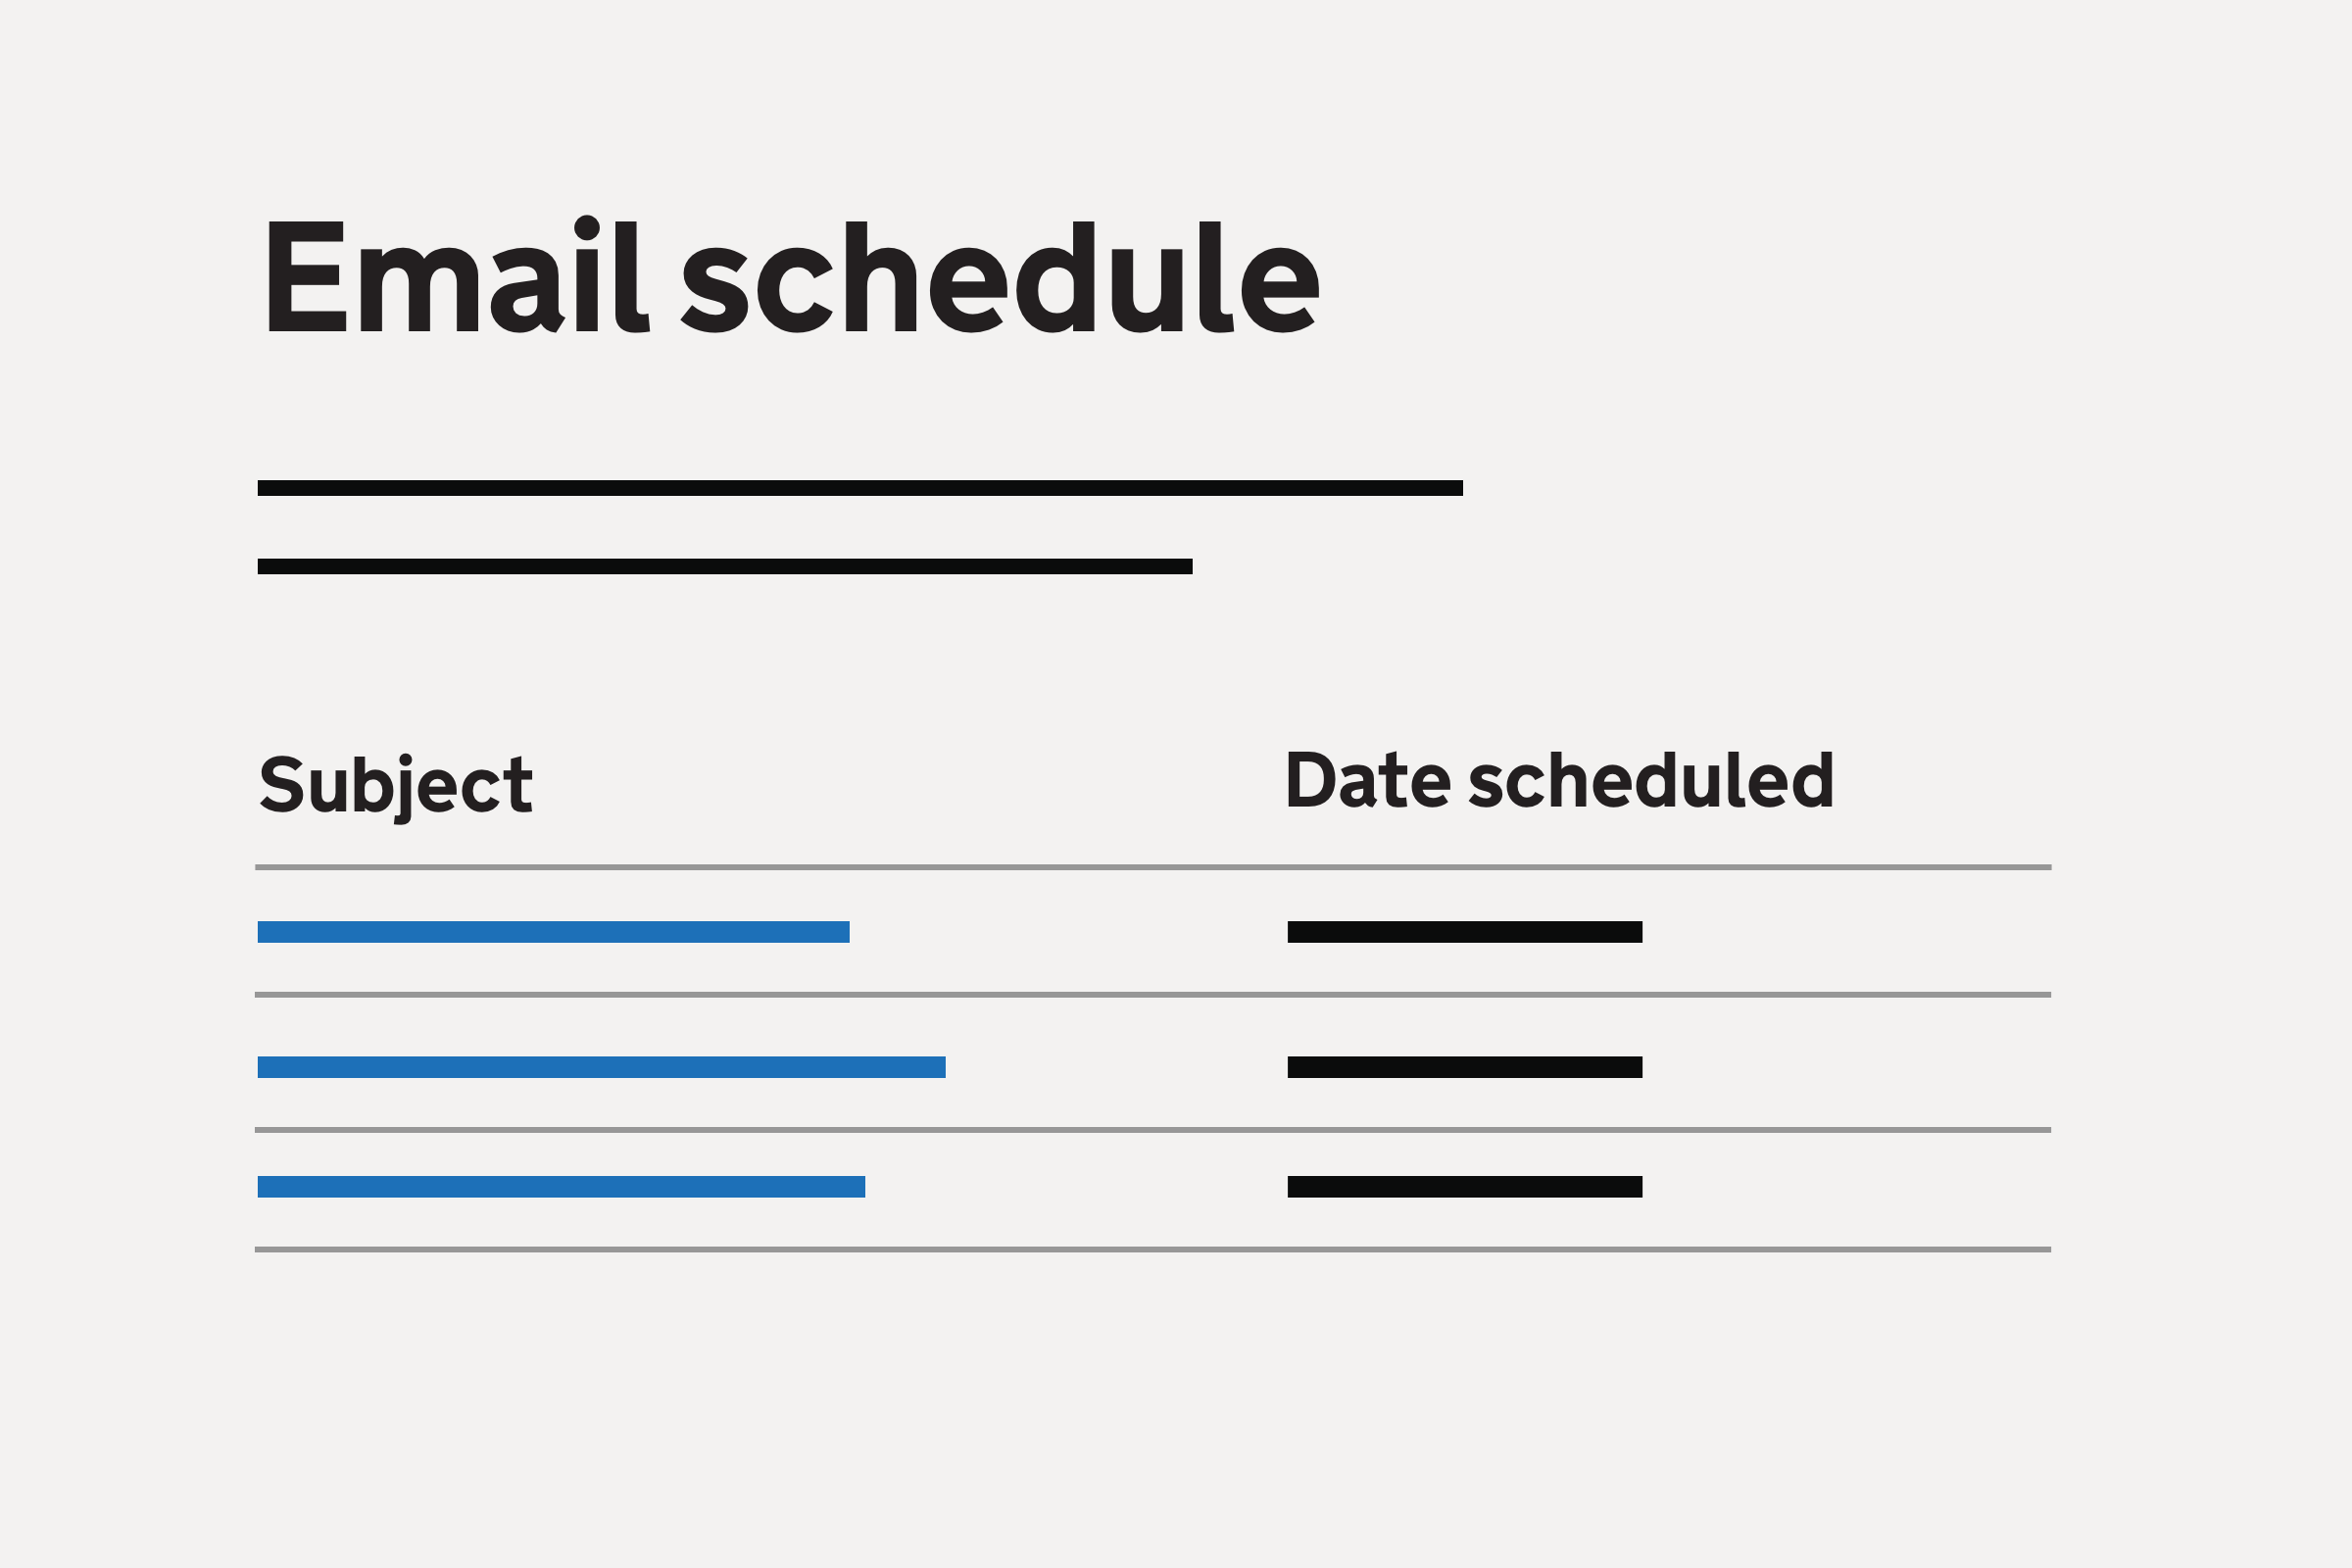 Illustration showing a heading “Email schedule’ with a table underneath containing columns for email subject and date scheduled